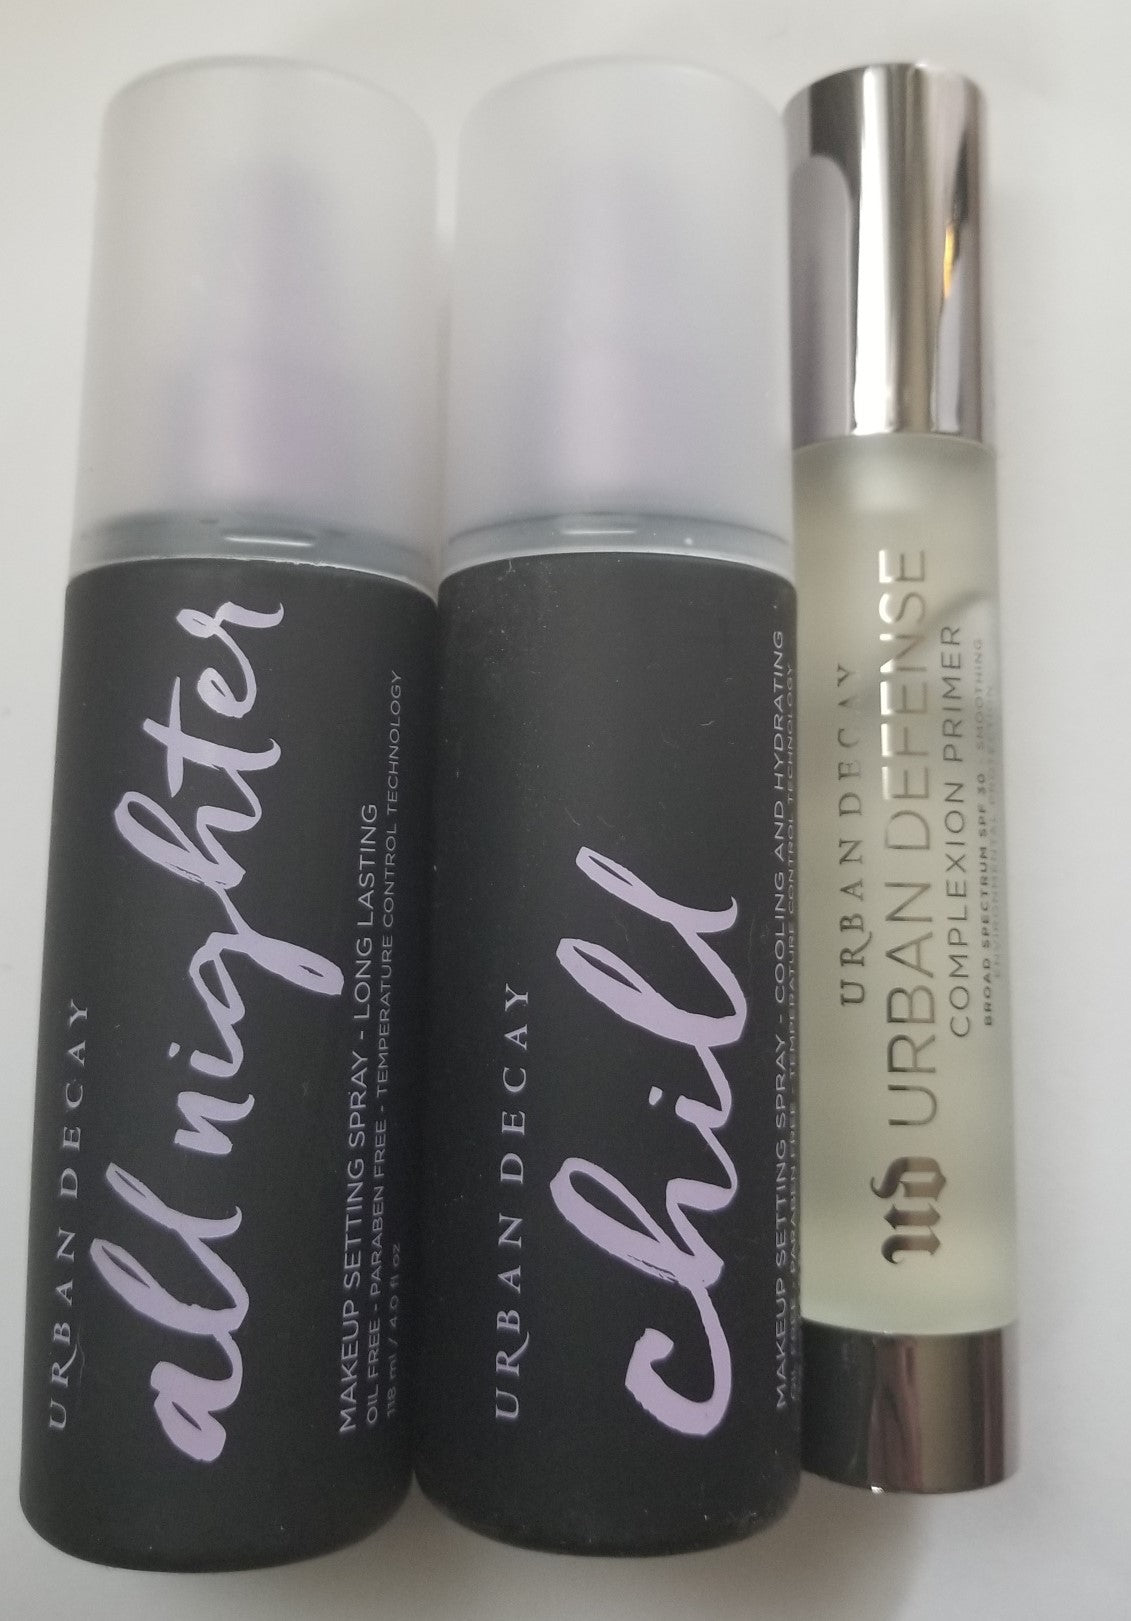 Review, Swatches, Photos, Makeup Trends 2018, 2019, 2020: Products To Make Your Makeup Last All Day, Urban Decay Cosmetics, All Nighter Makeup Setting Spray, Chill Cooling and Hydrating Setting Spray, Urban Defense Complexion Primer SPF 30